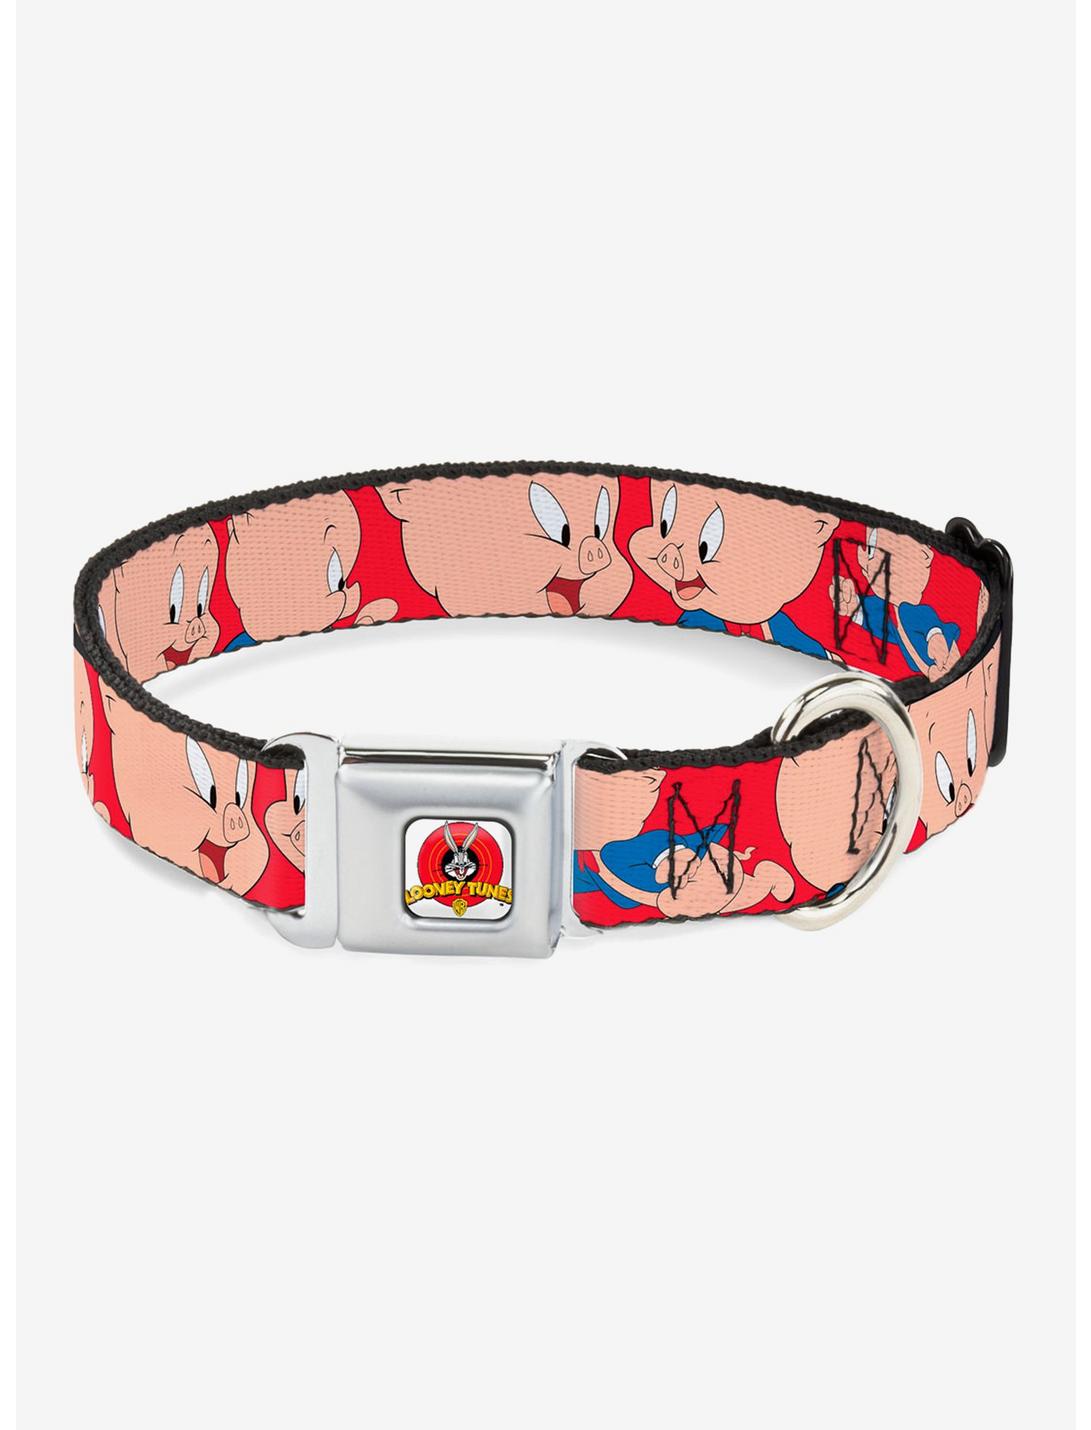 Looney Tunes Porky Pig Expressions Seatbelt Buckle Dog Collar, RED, hi-res